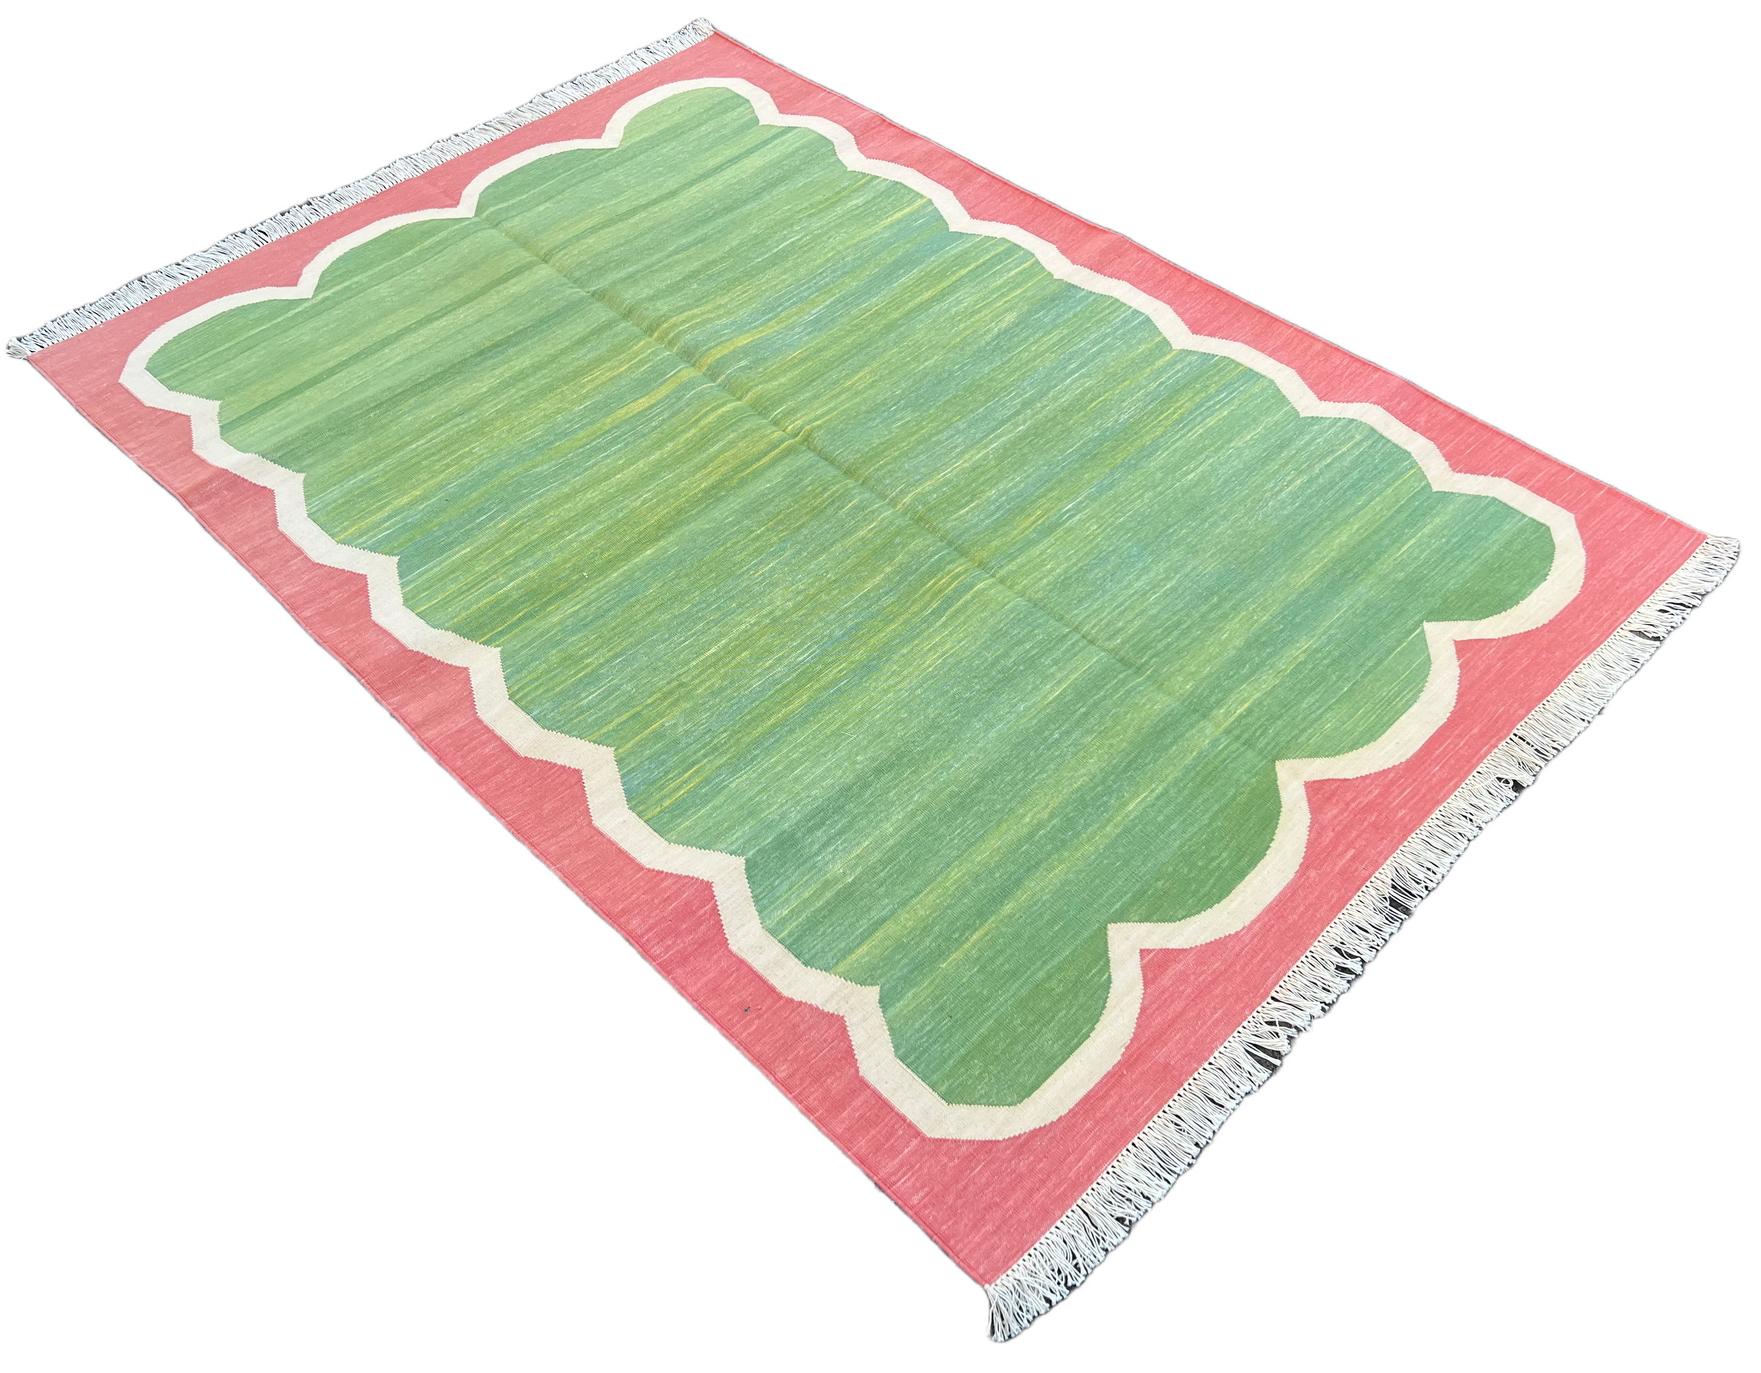 Cotton Vegetable Dyed Green, Cream And Coral Scalloped Striped Indian Dhurrie Rug-4'x6' 
These special flat-weave dhurries are hand-woven with 15 ply 100% cotton yarn. Due to the special manufacturing techniques used to create our rugs, the size and